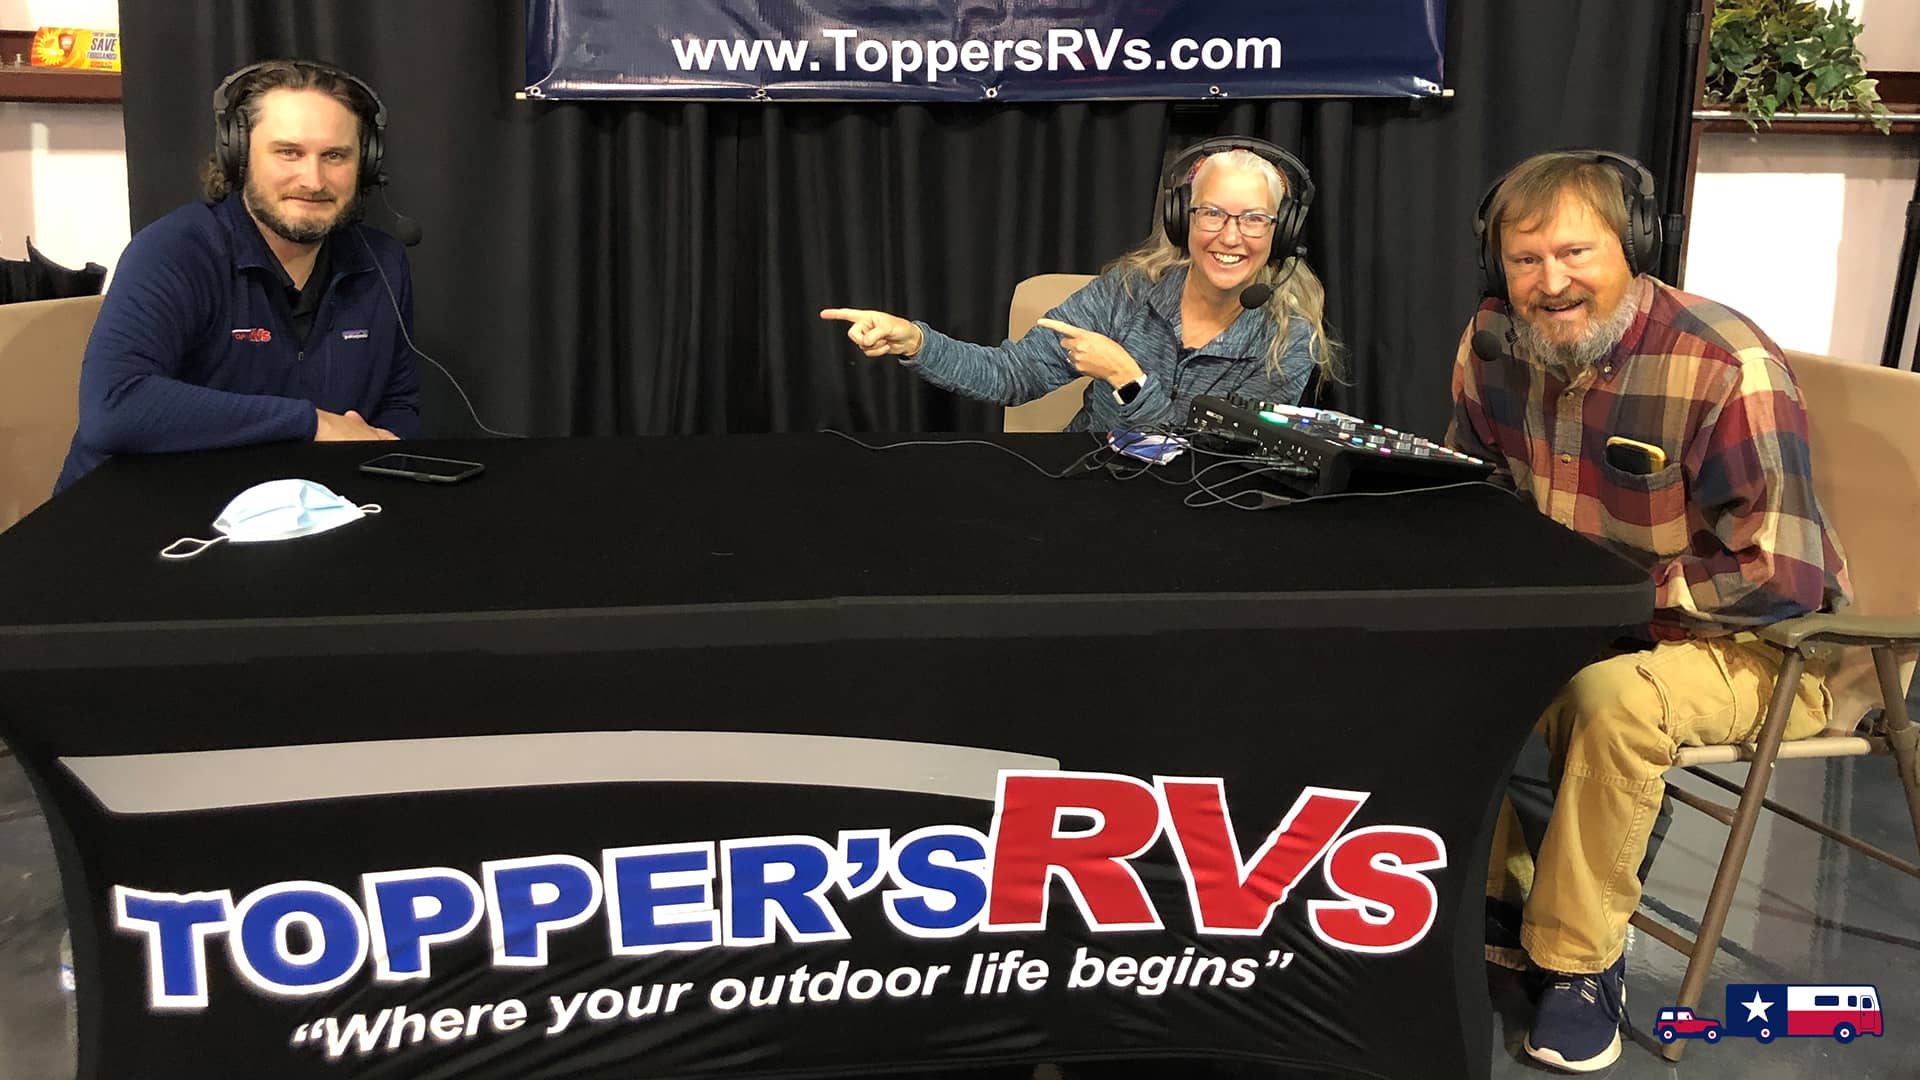 3rd Generation RV Dealer Shares What It's Like to Grow Up in the Industry